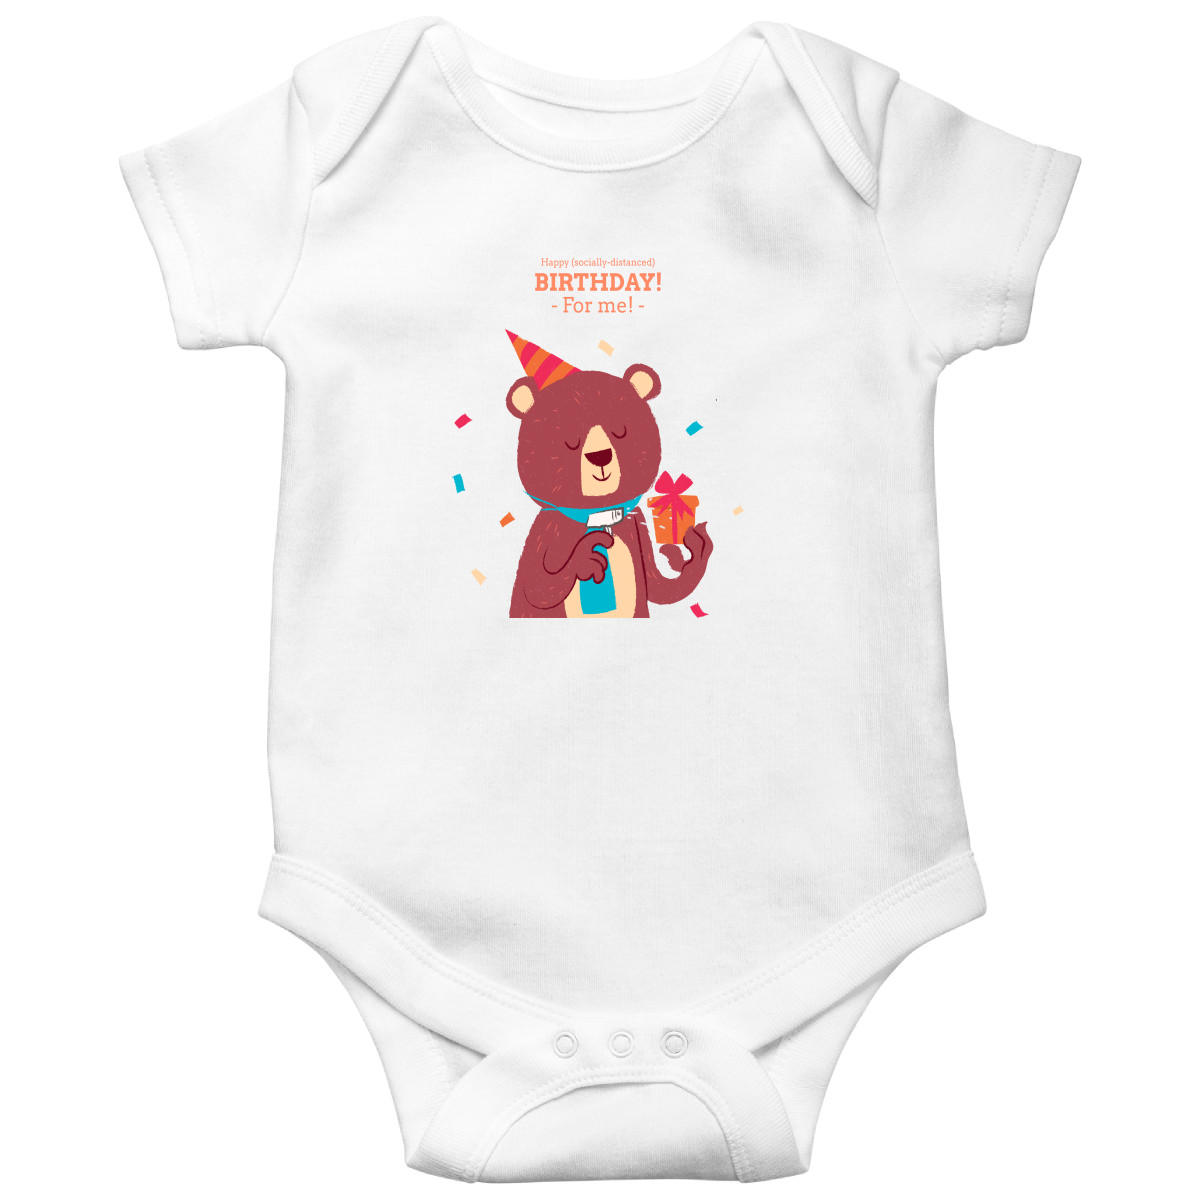 Happy (social distanced) birthday for me  Baby Bodysuits | White